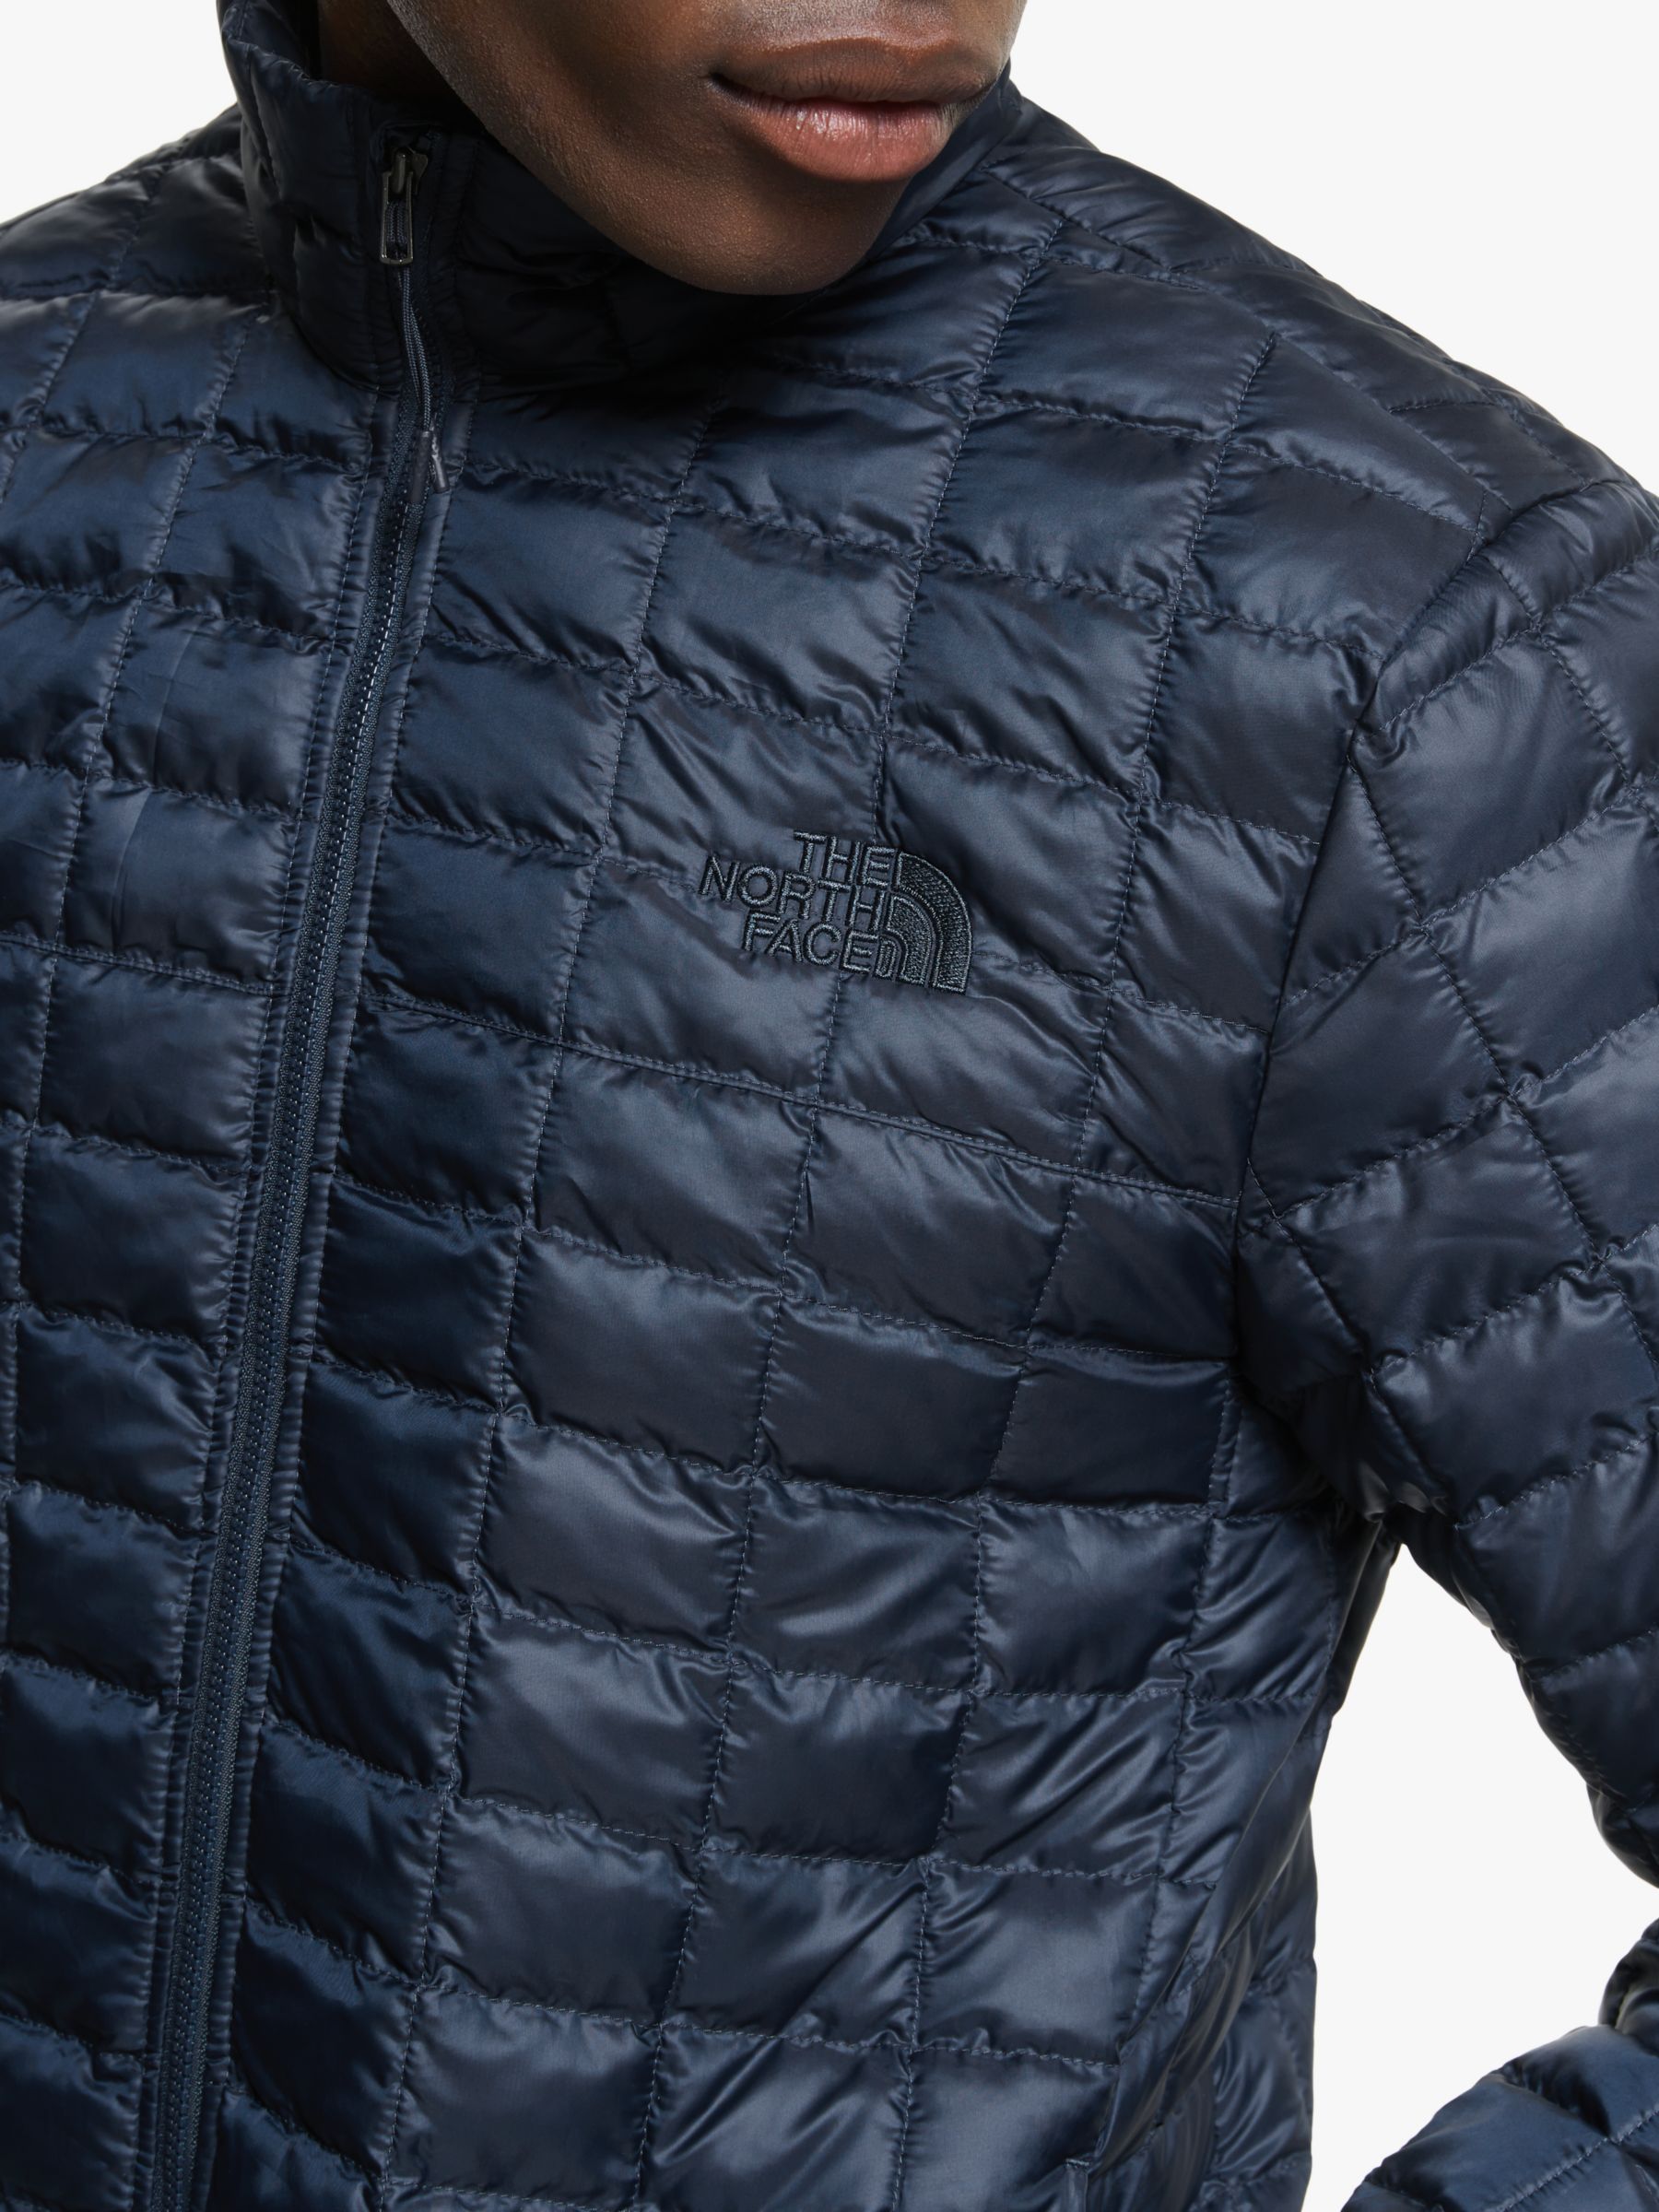 north face thermoball navy blue